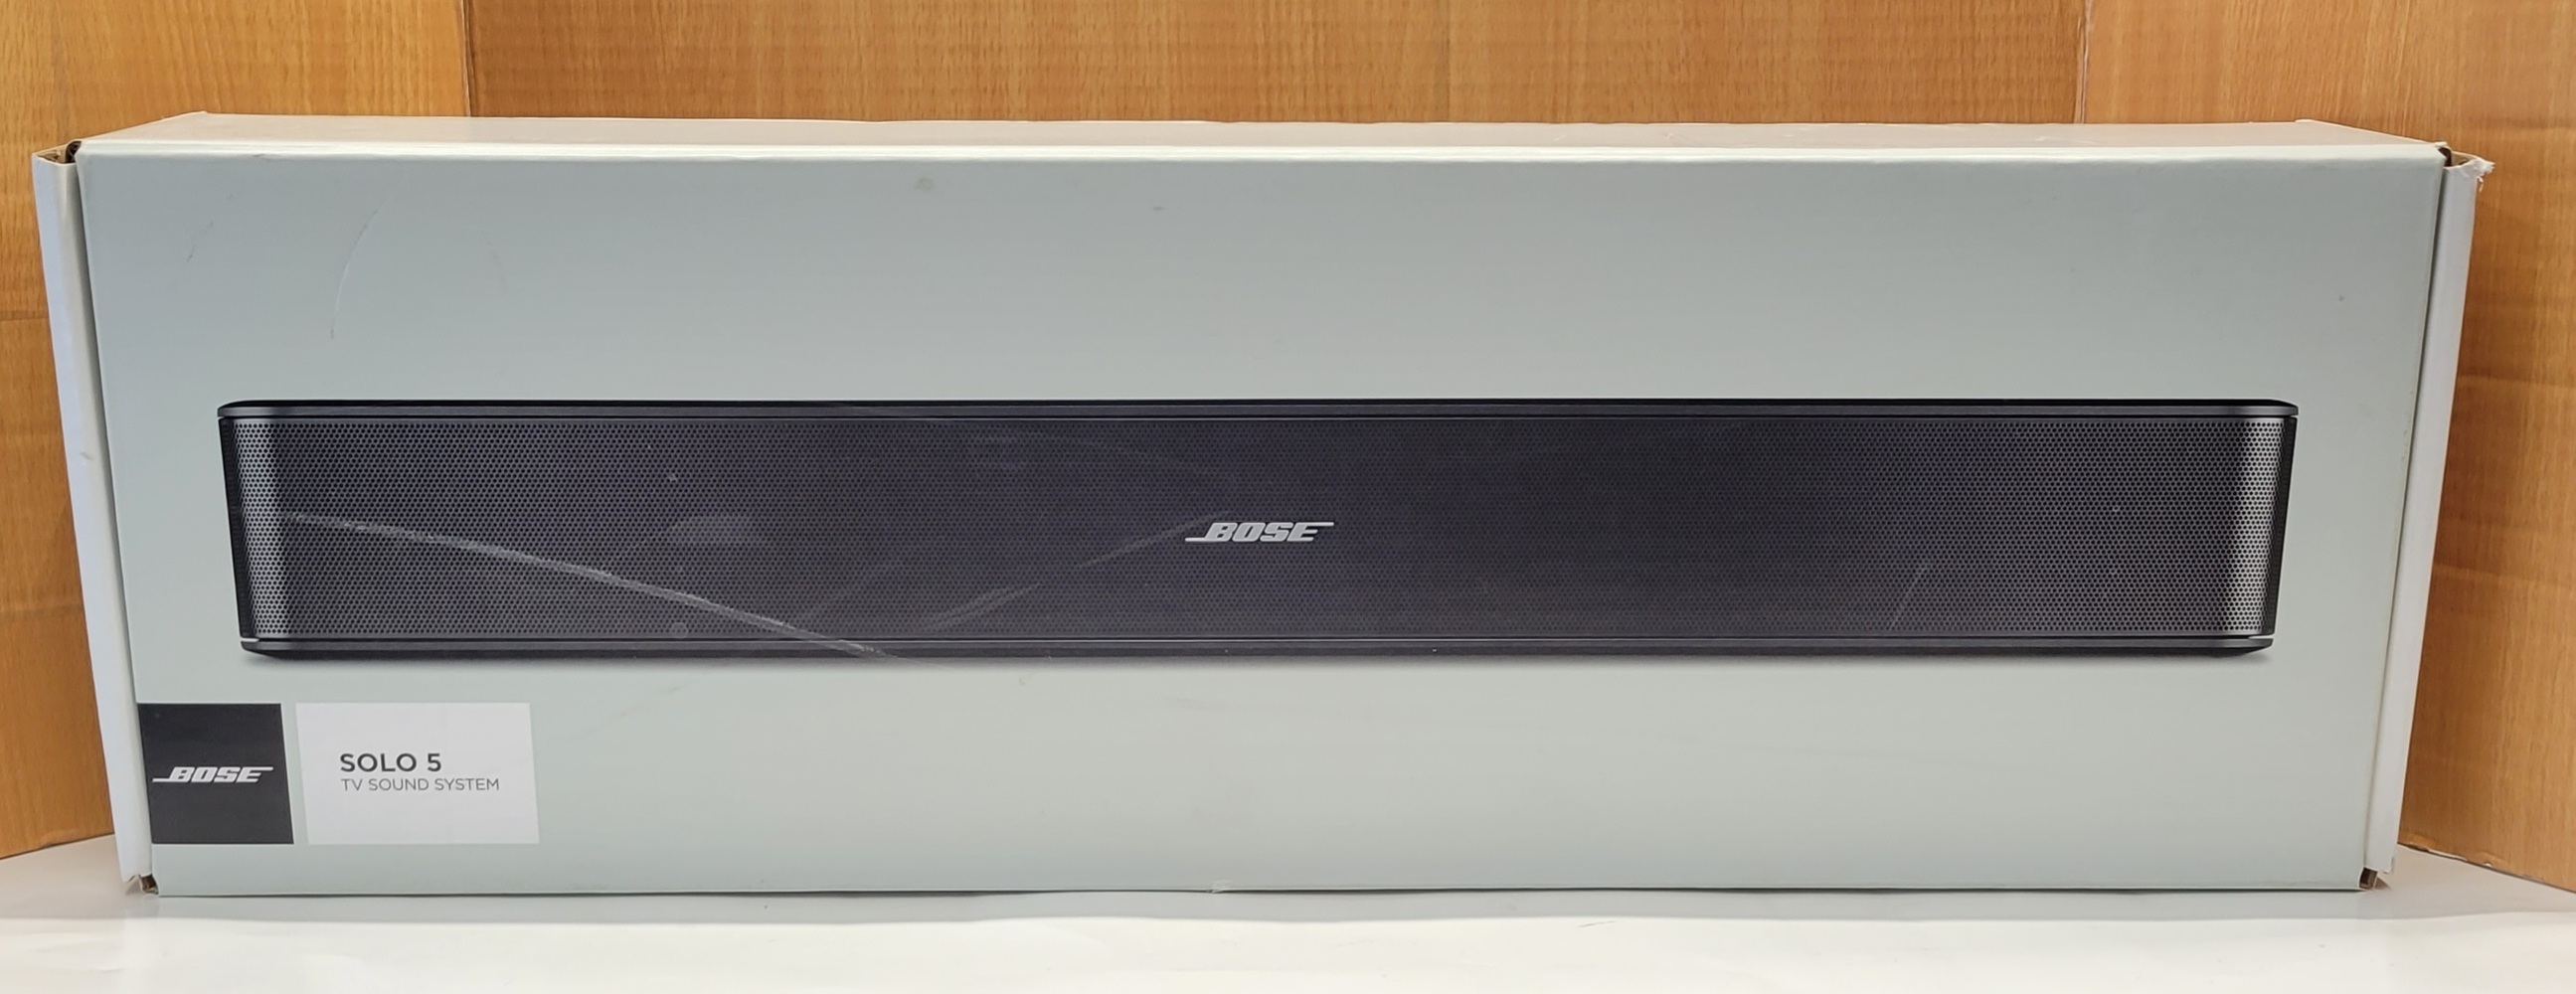 Bose Solo 5 T.V. Sound System Model 418775 | Avenue Shop Swap & Sell